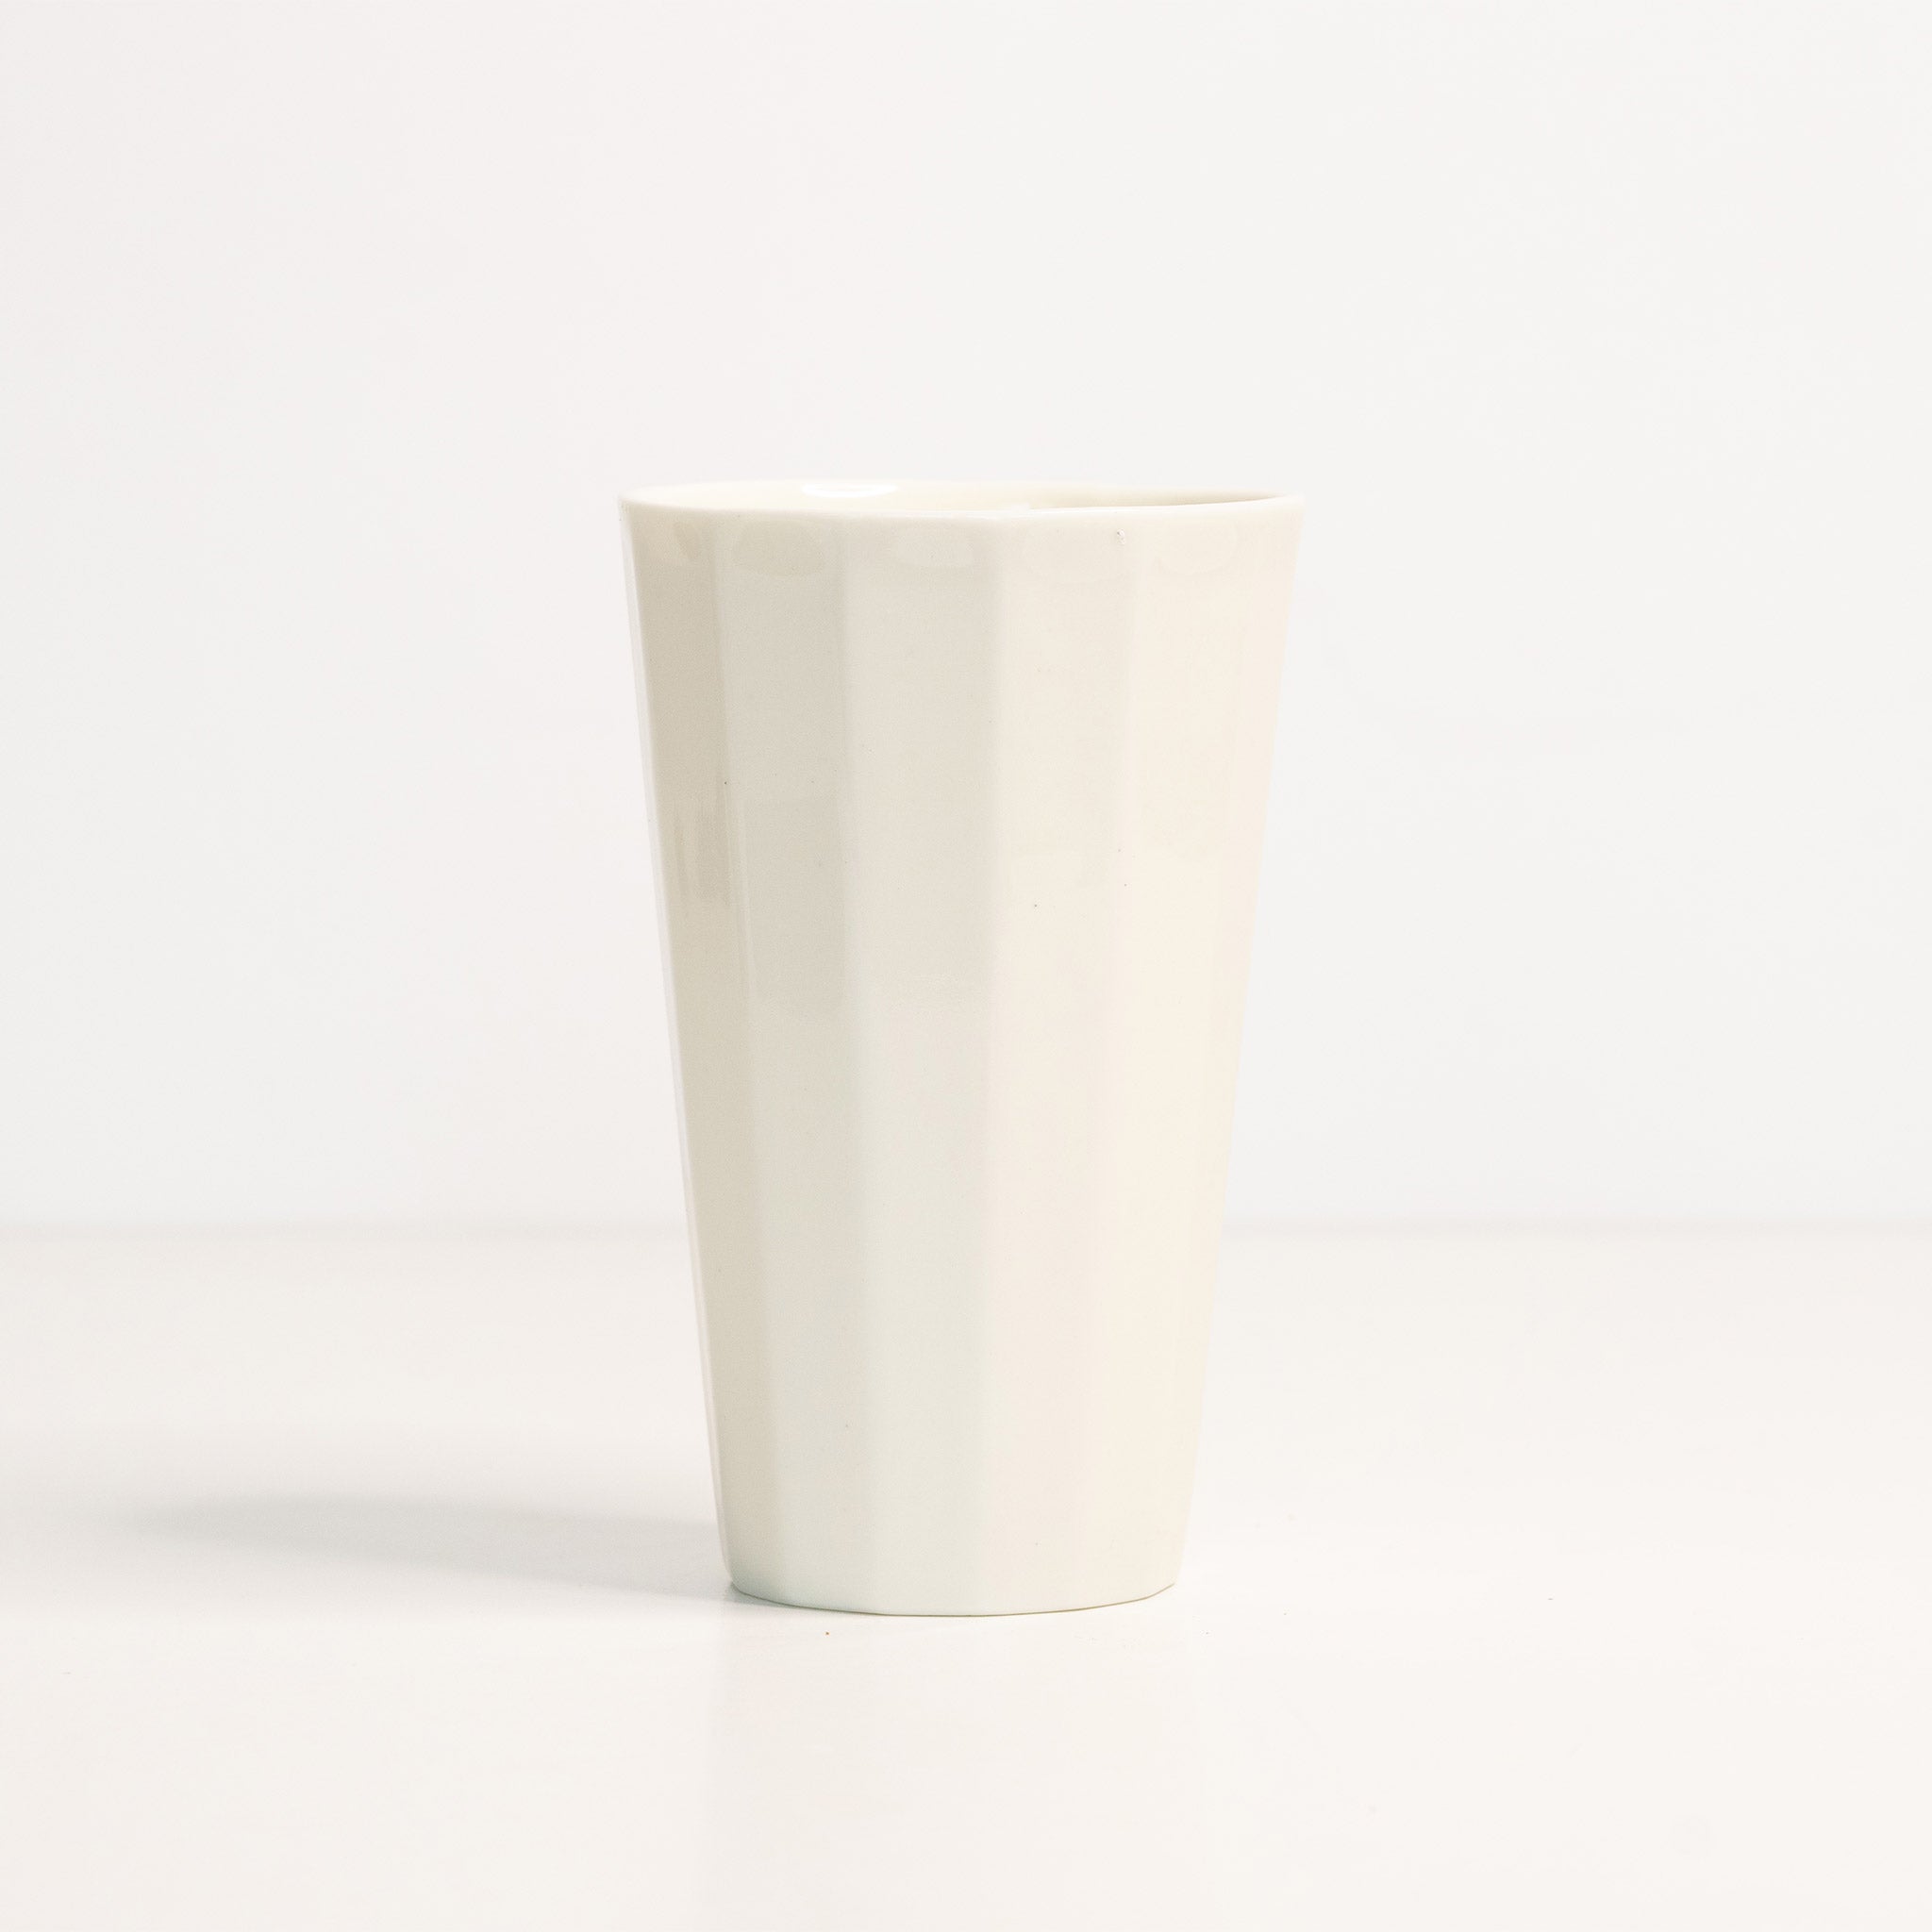 Translucent Porcelain 16 oz Cup The Bright Angle